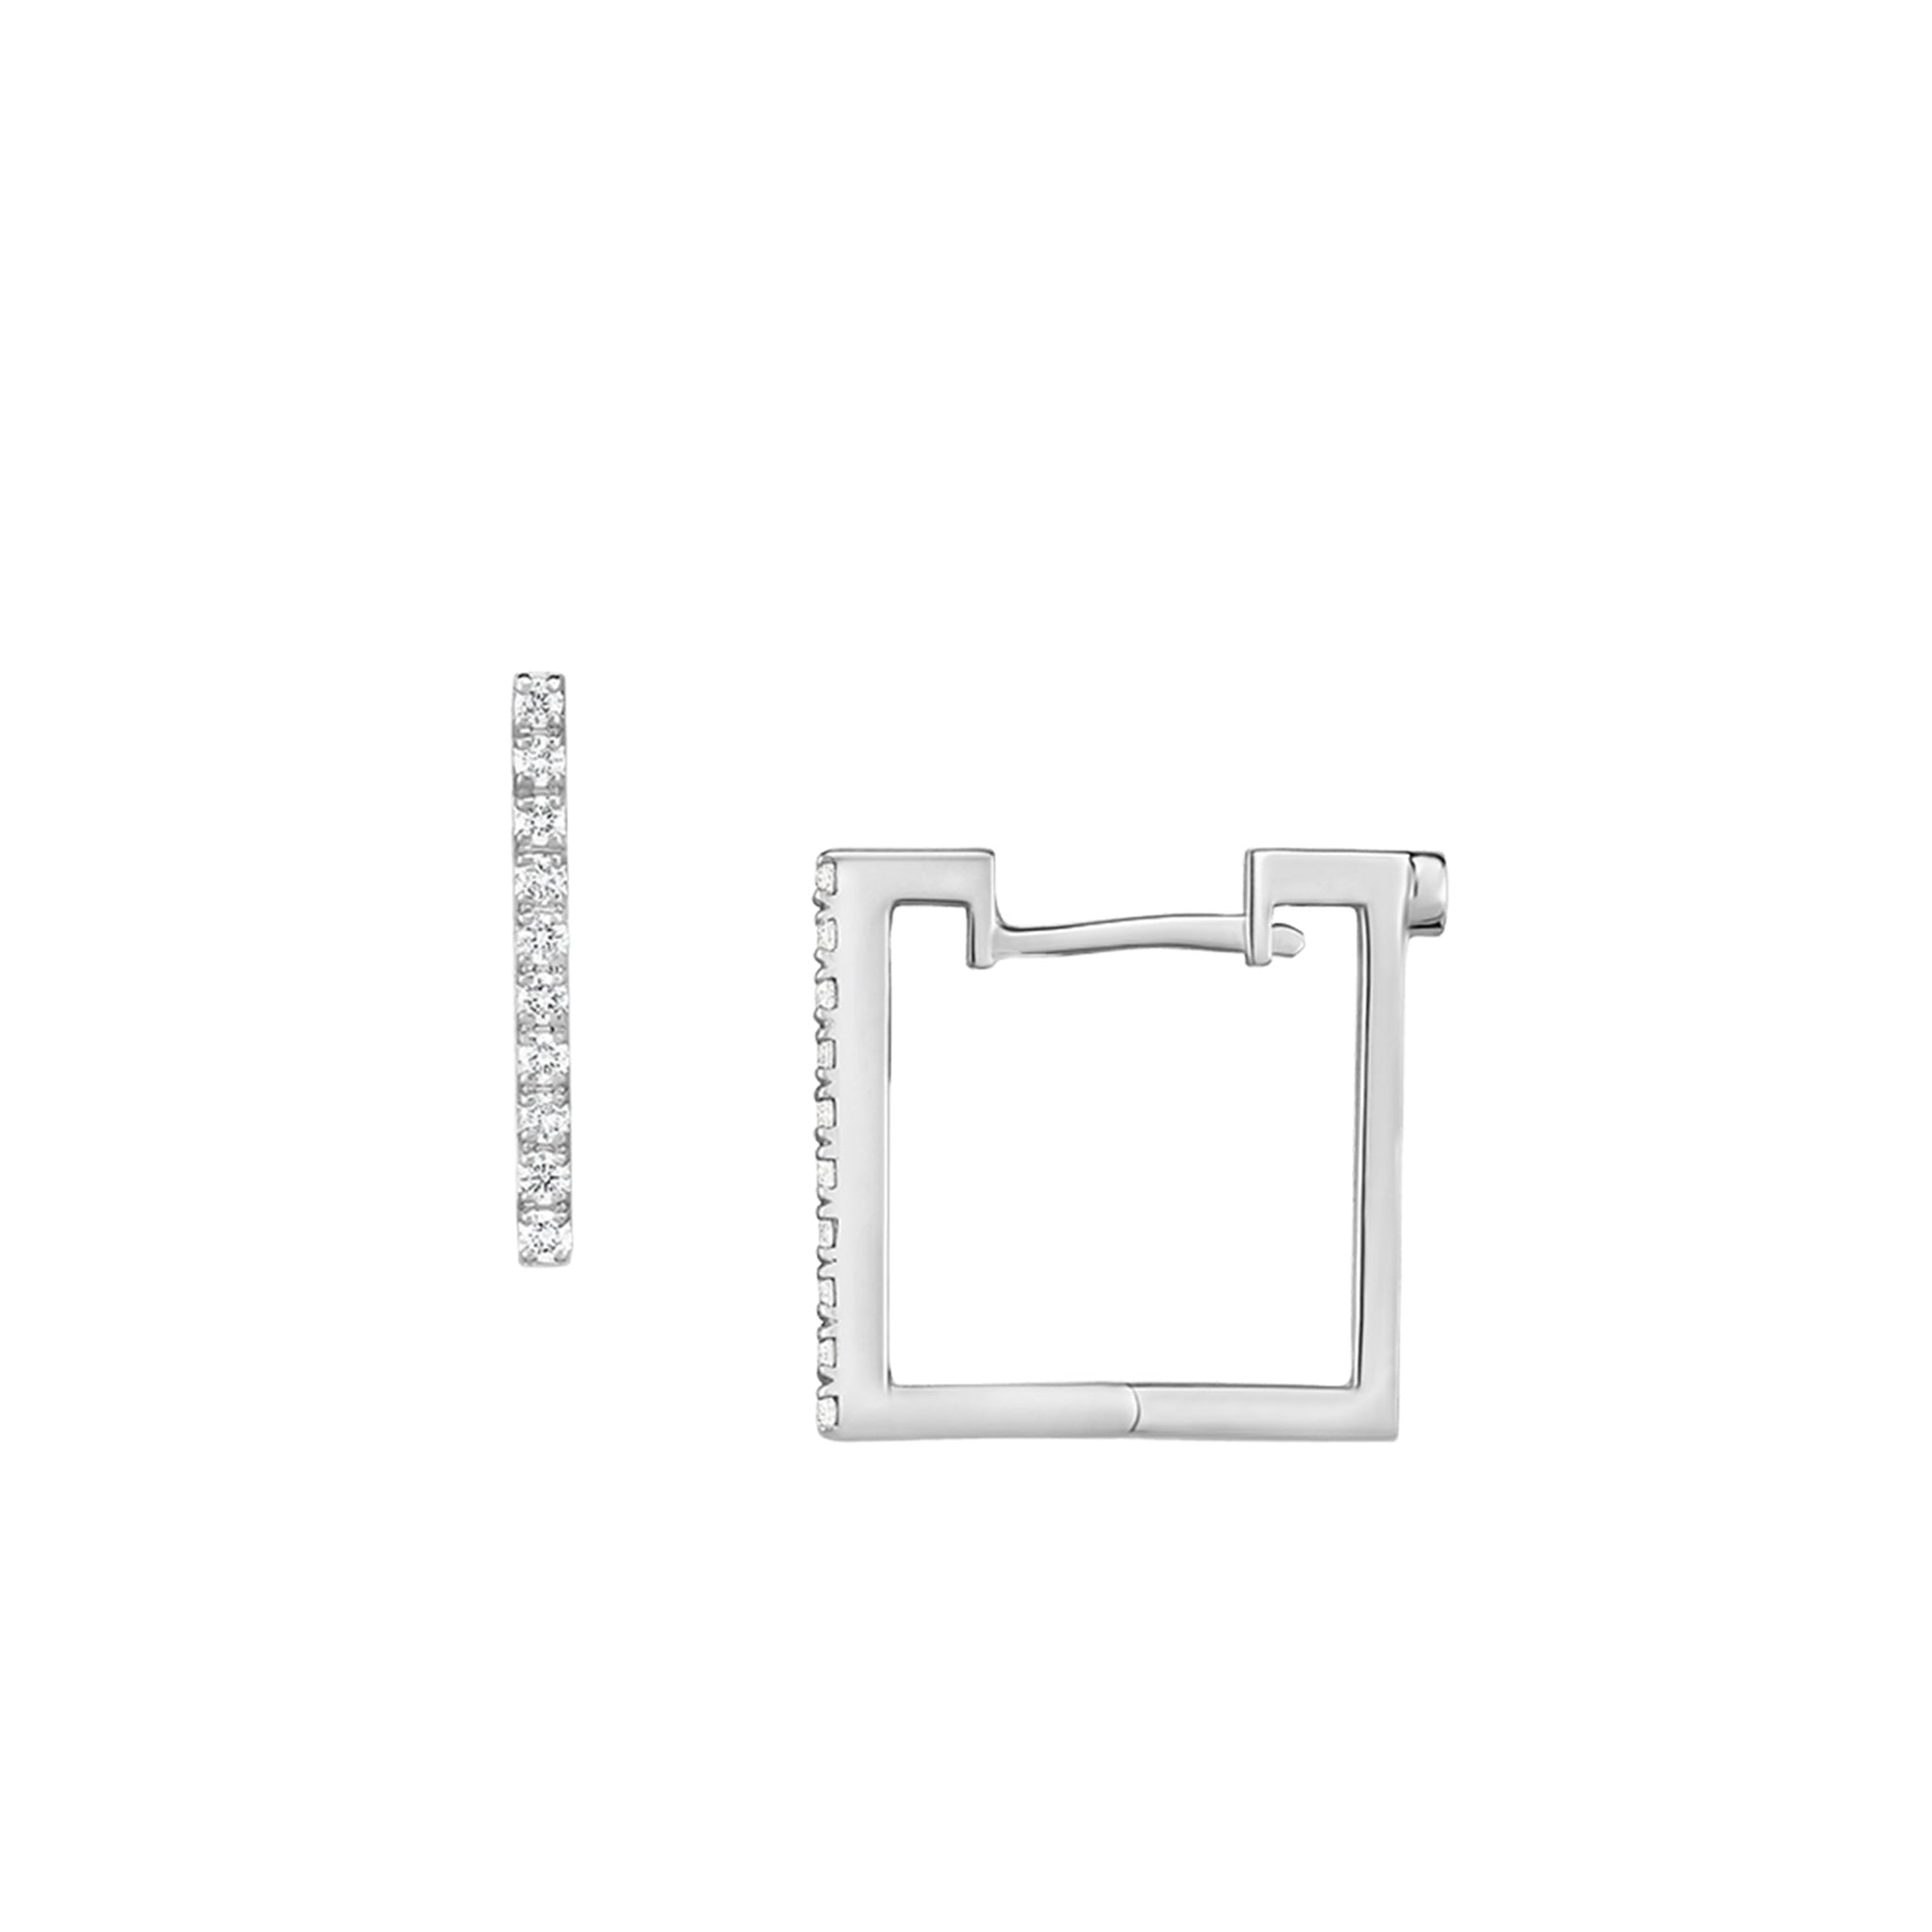 Roberto Coin square diamond earrings - Be On Park